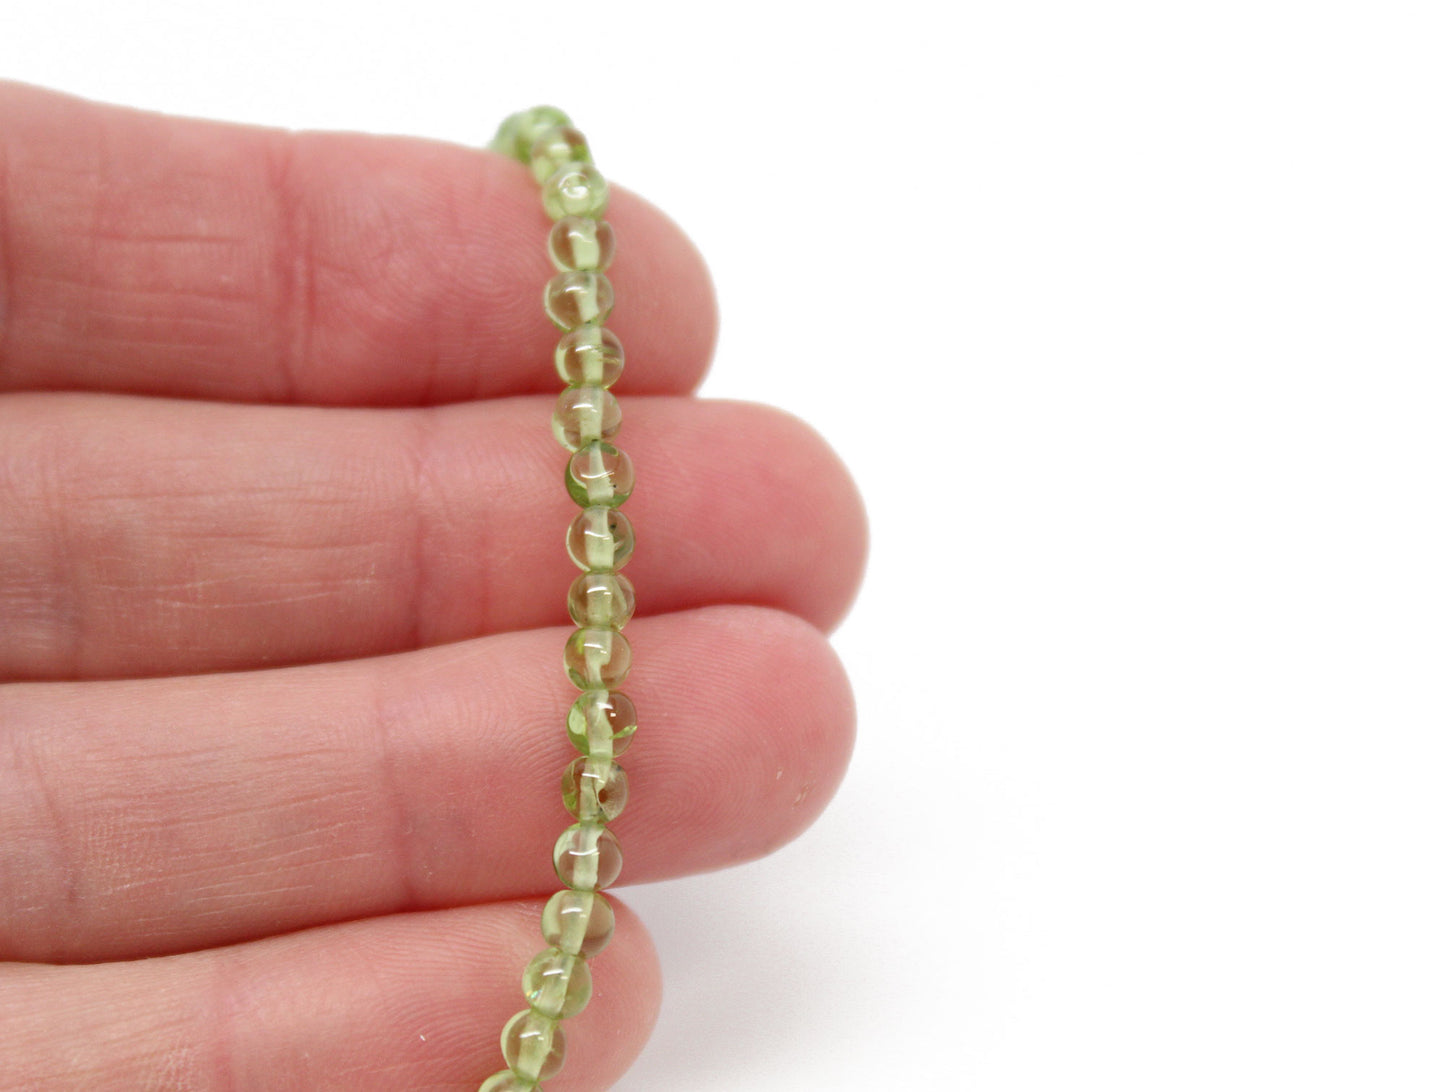 Peridot Bracelet with Lobster Clasp, Small 4mm Beads